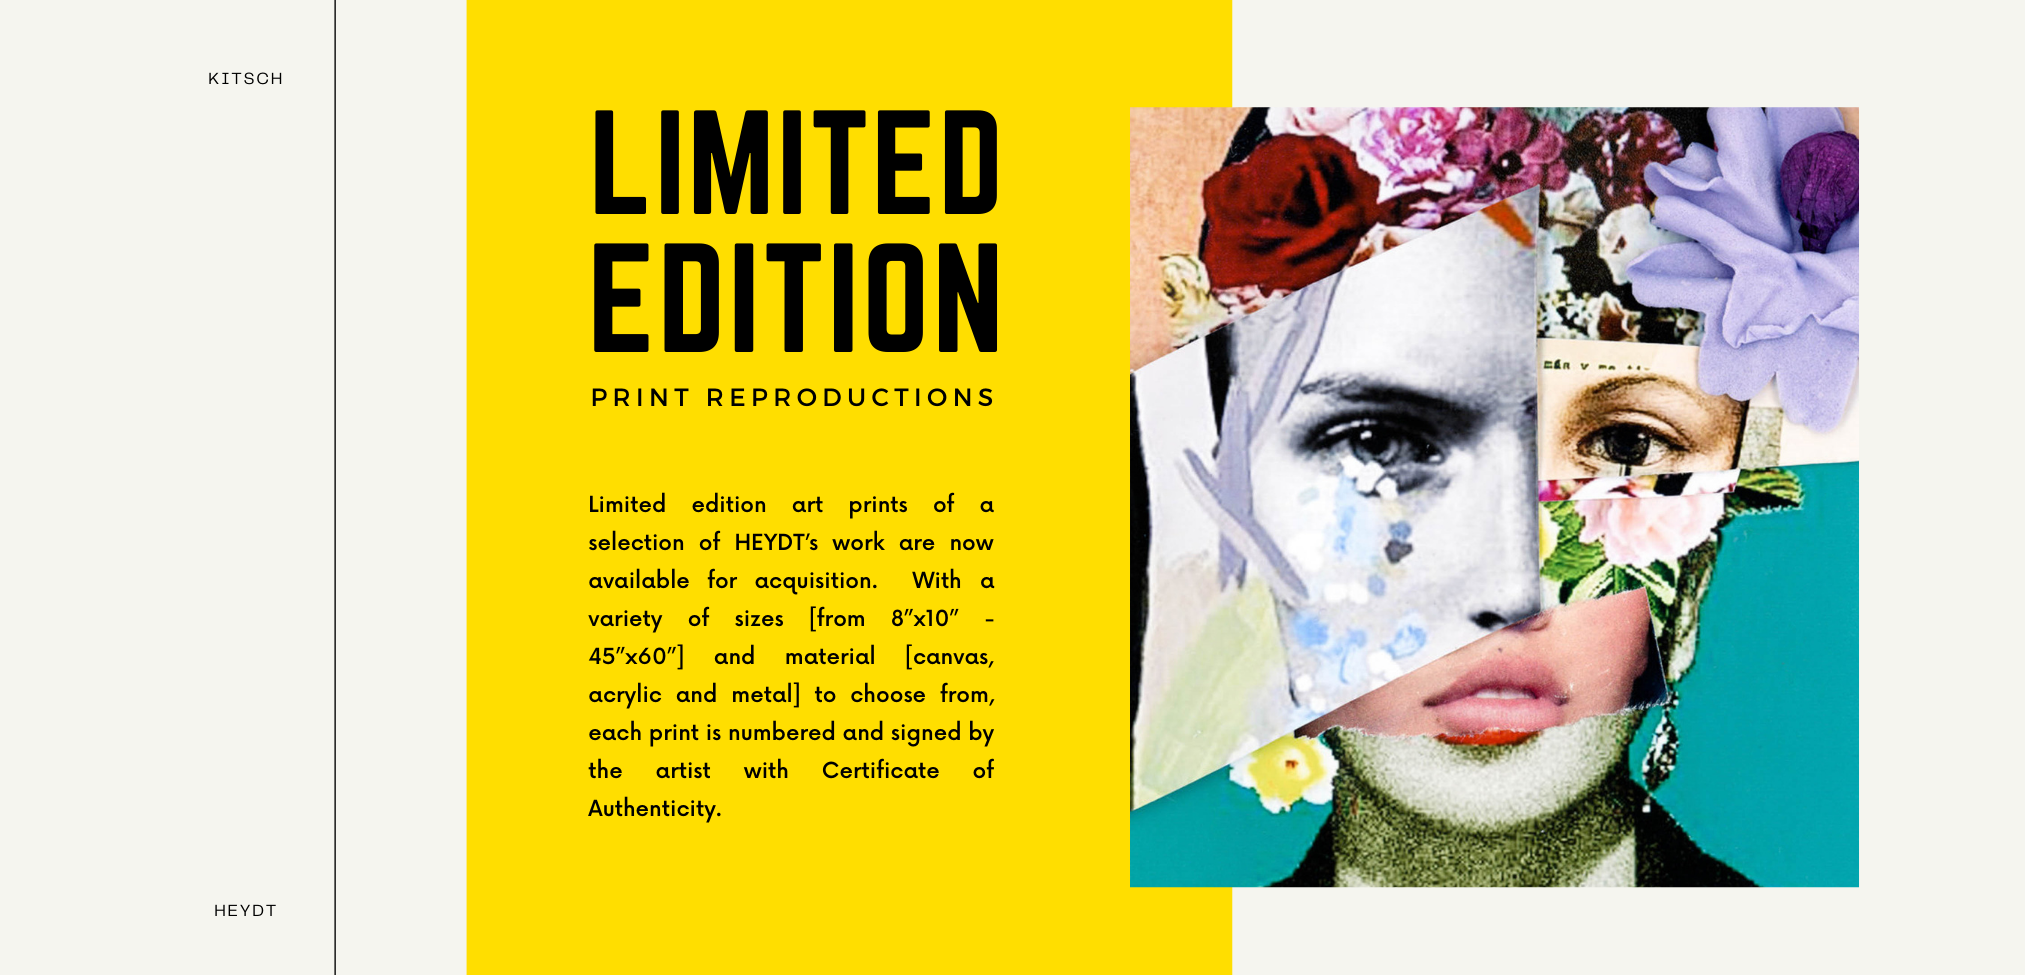 limited edition prints-KITSCH-HEYDT53.png